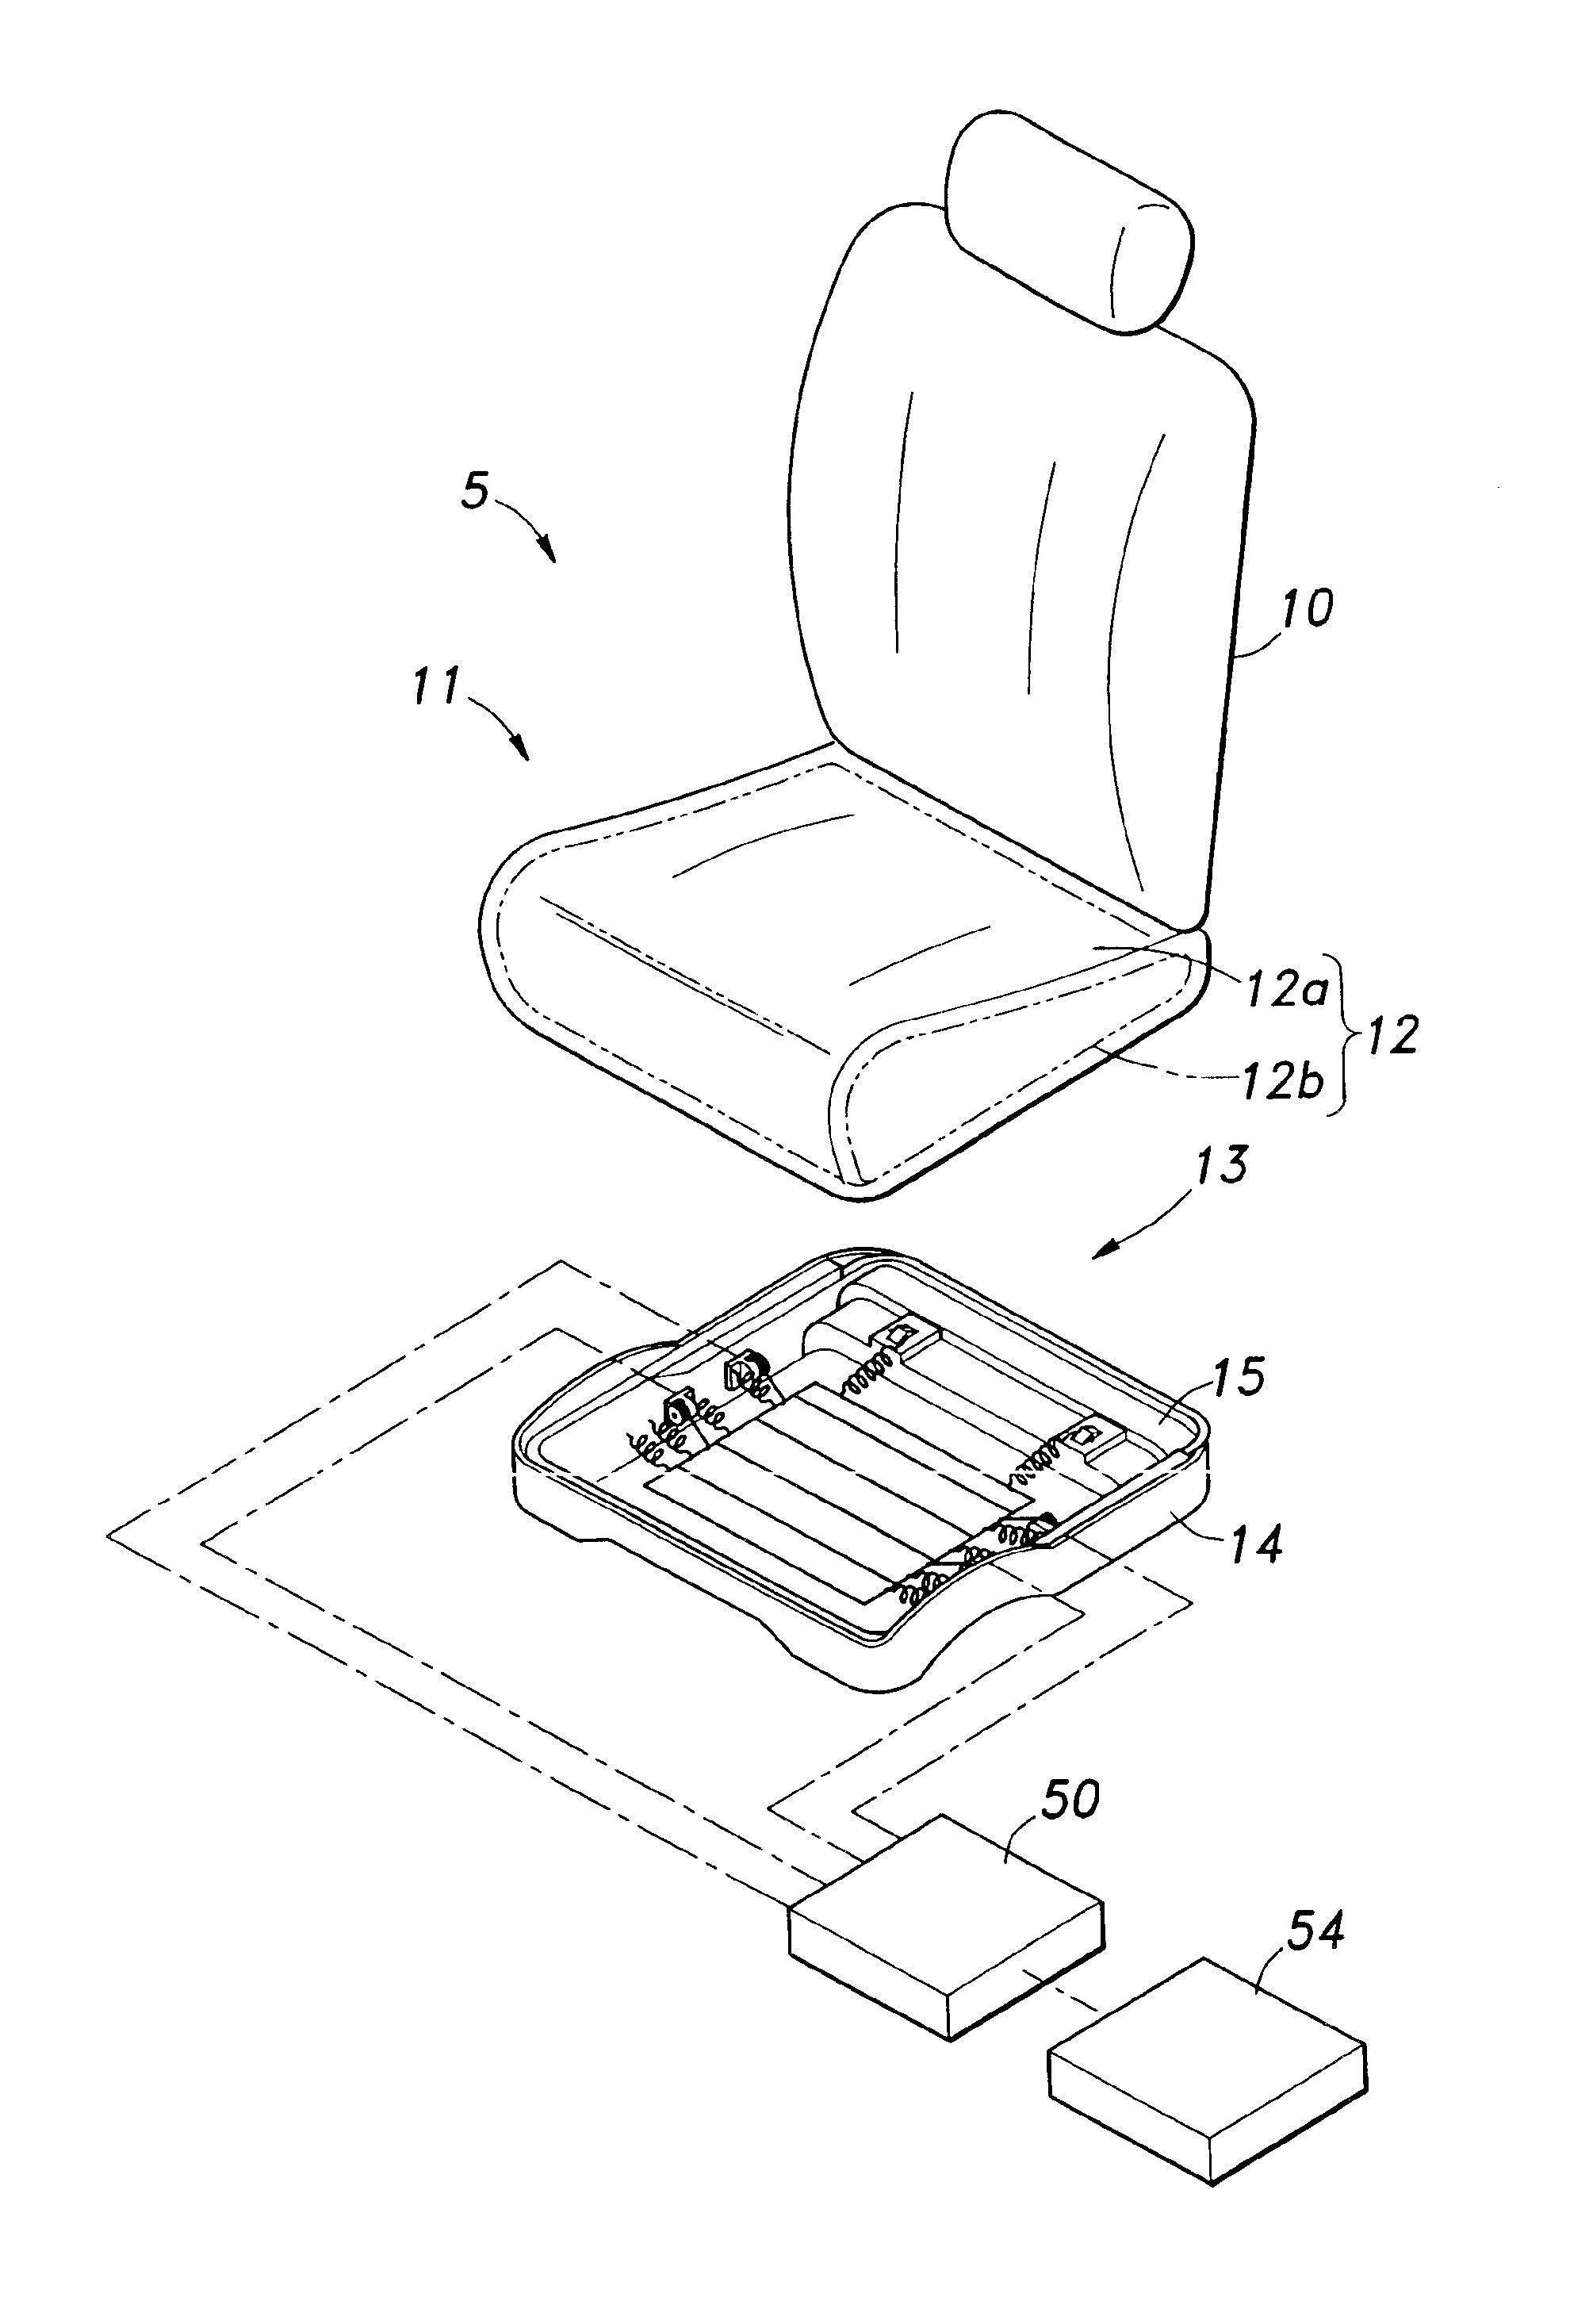 Vehicle seat incorporated with an occupant sensor